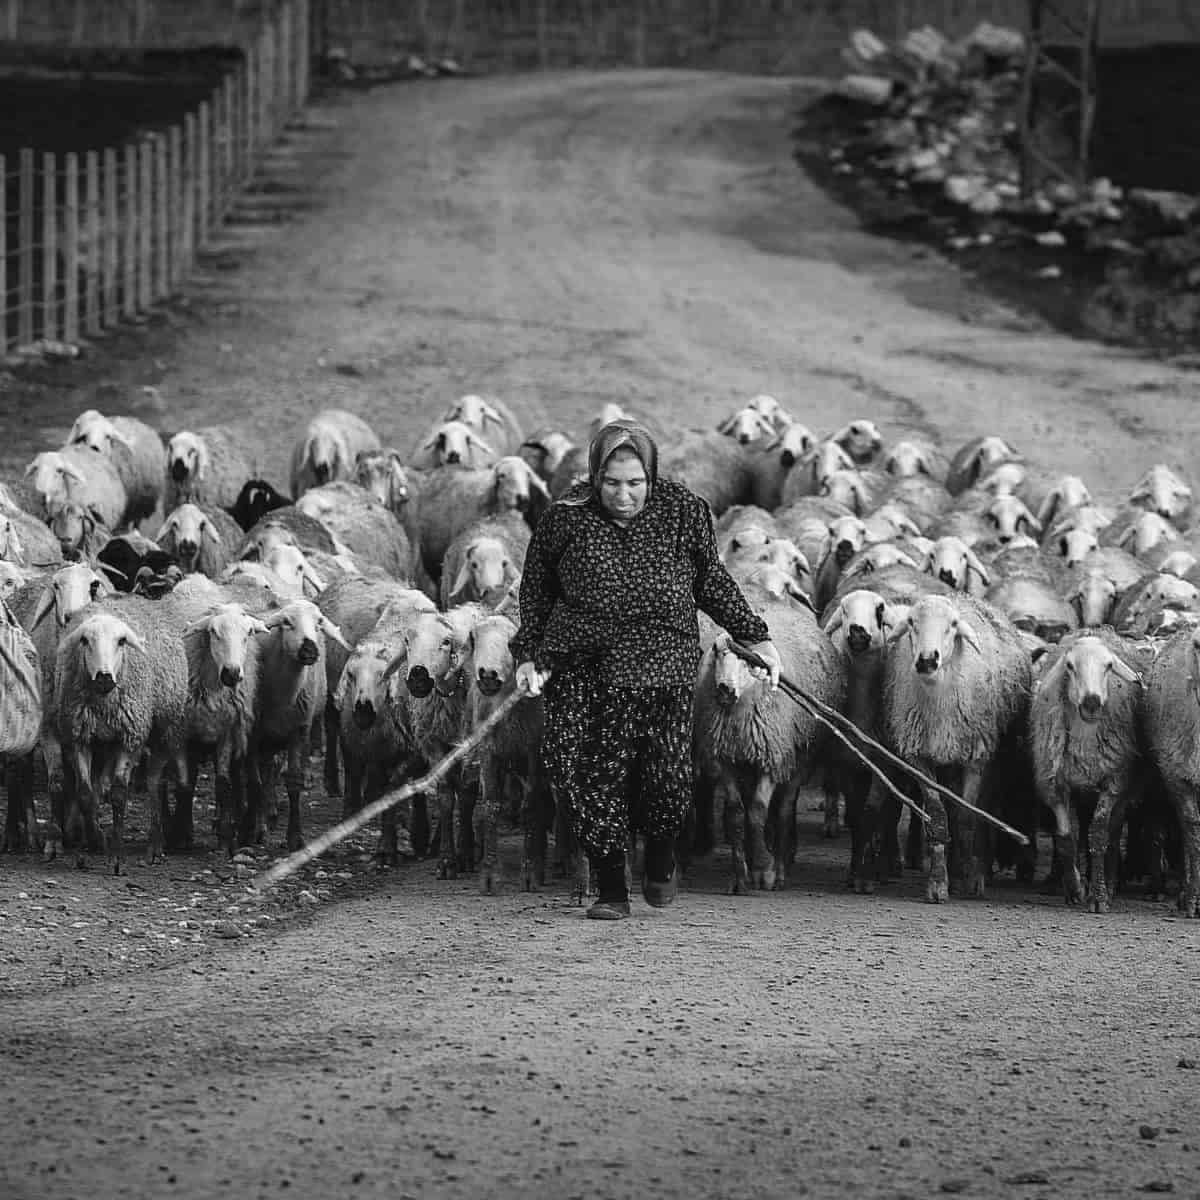 Woman walking on a road leading a herd of sheep.